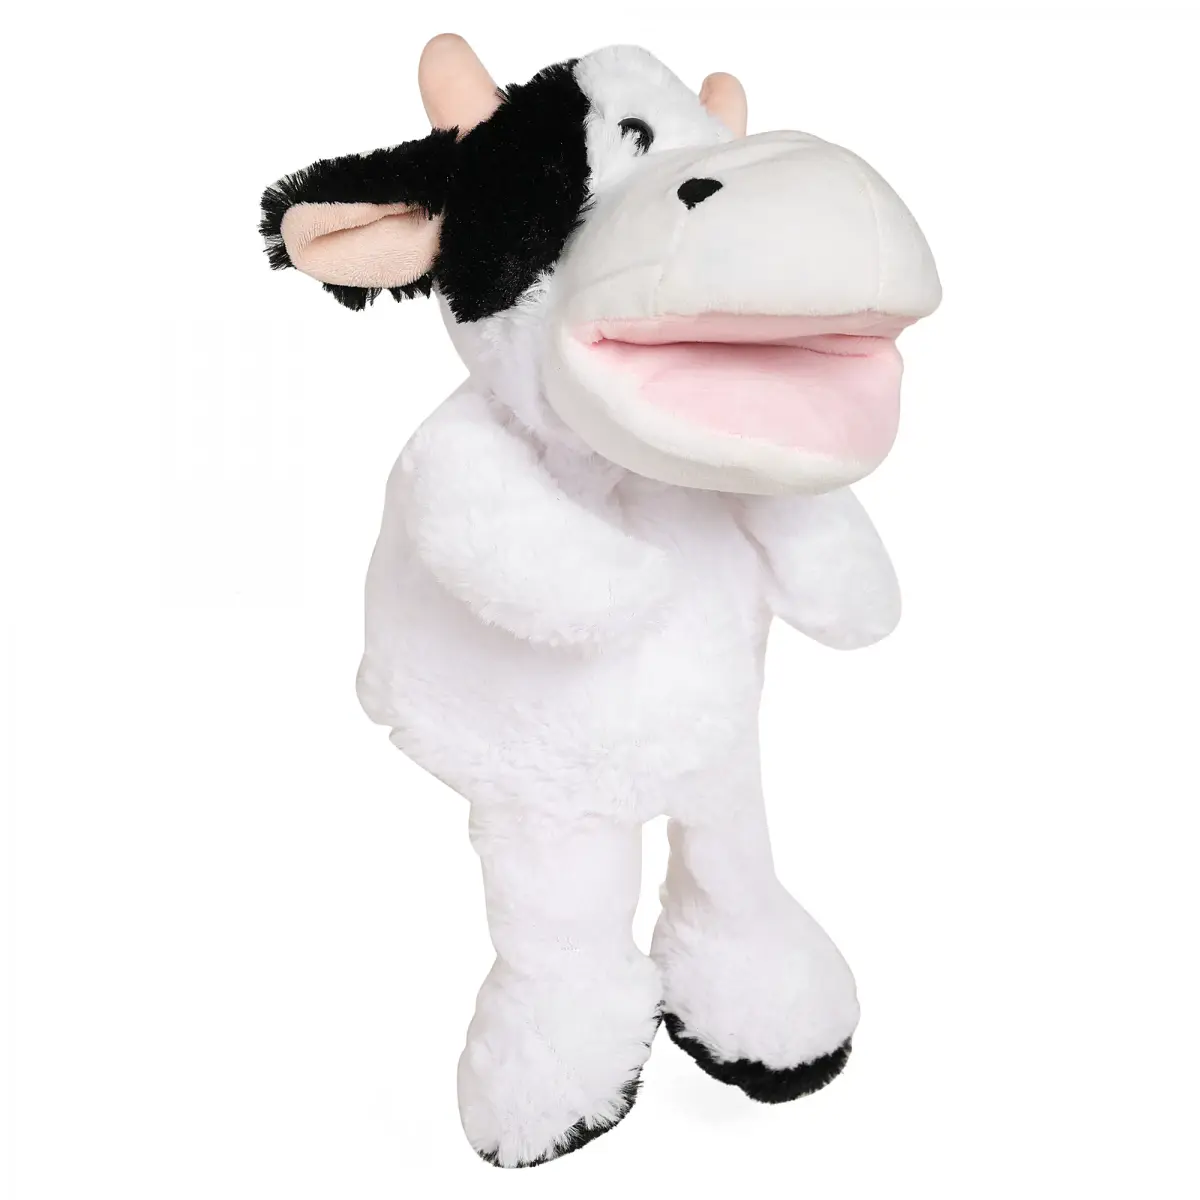 Hamleys Pugs & Play Cow Talking Hand Puppet, 3Y+, Black & White